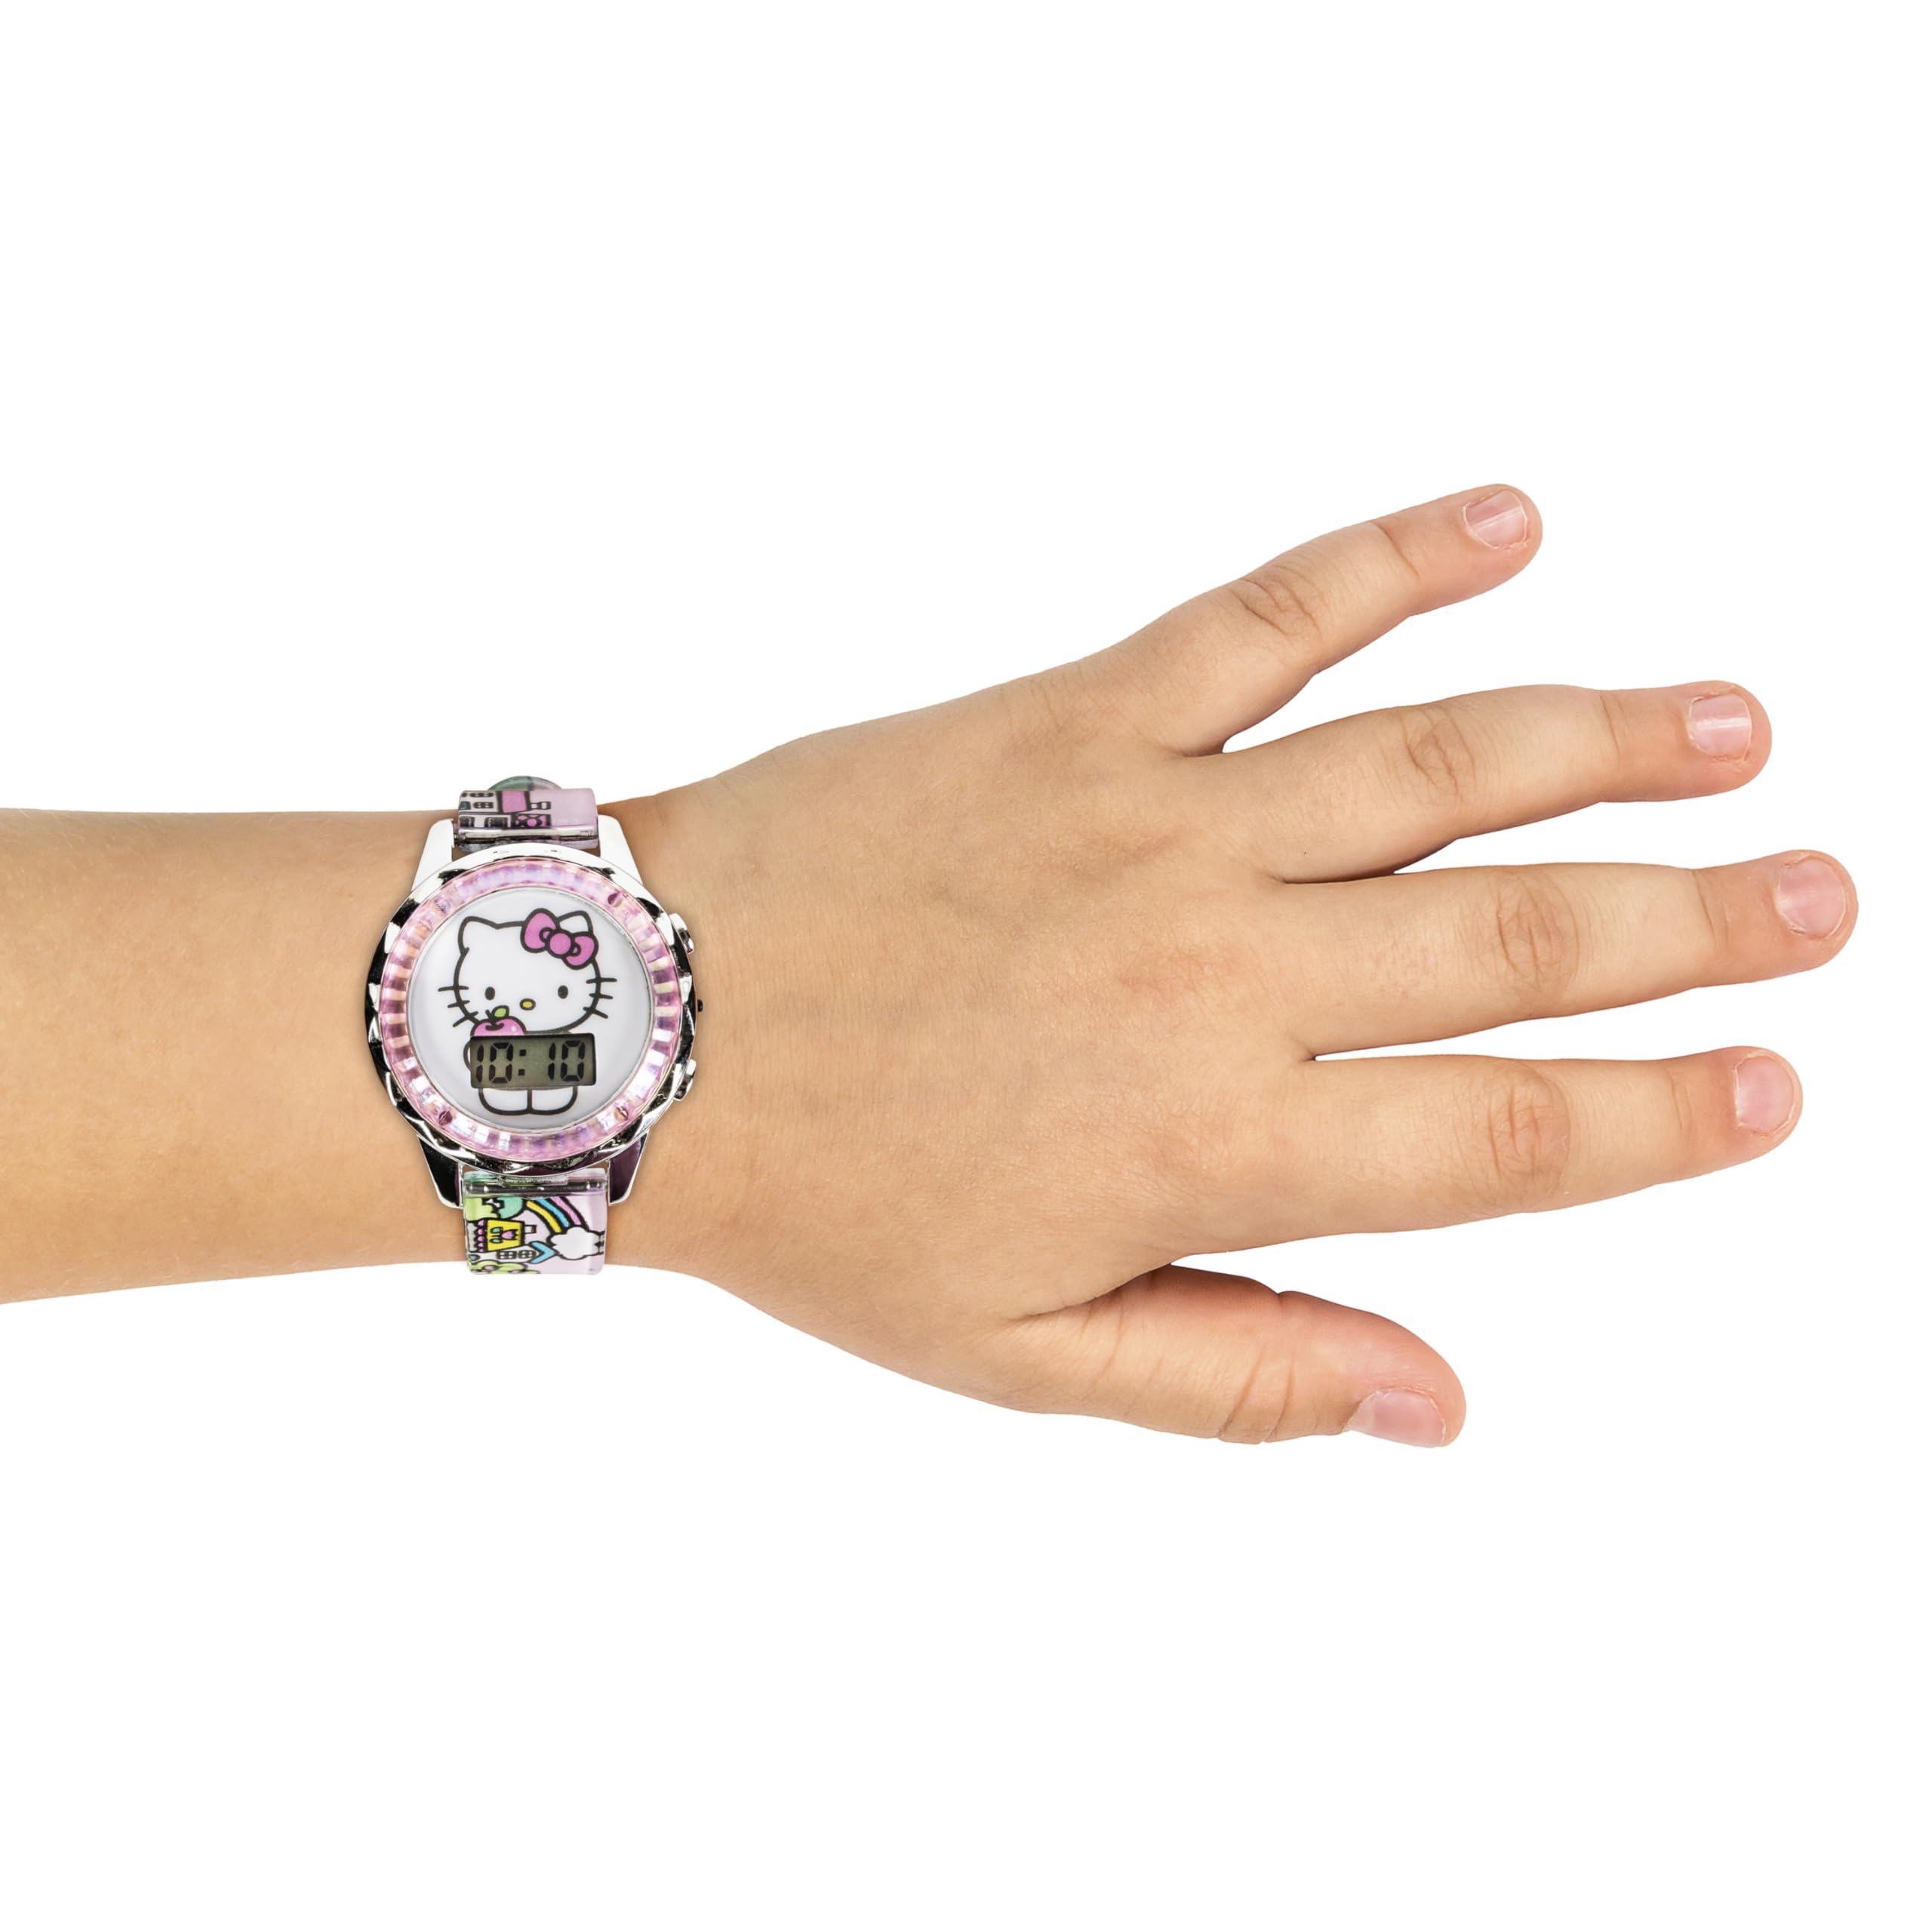 Accutime Hello Kitty Digital LCD Quartz Kids Pink Watch for Girls with All Over Print Band Strap (Model: HK4203AZ)